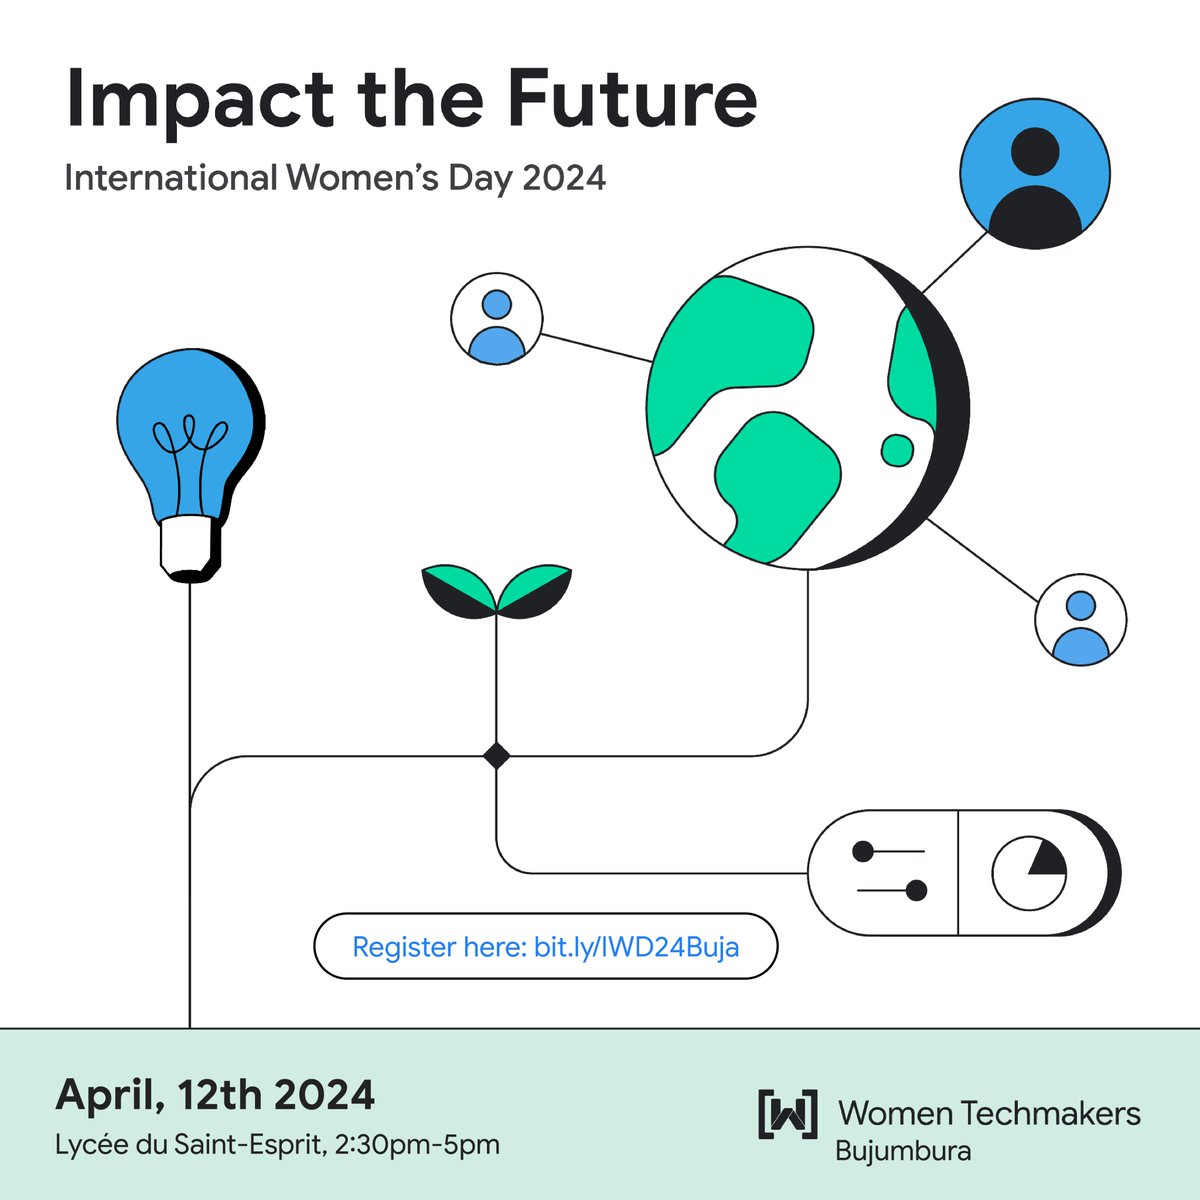 Just 9 days left and we'll be celebrating the impact of #WomenInTech around the globe with the @WomenTechmakers community in Bujumbura! 🥳🤩 at @lseburundi. Together, we can create a better tomorrow for all. Book your seat here 👉🏼 bit.ly/IWD24Buja. It's FREE!